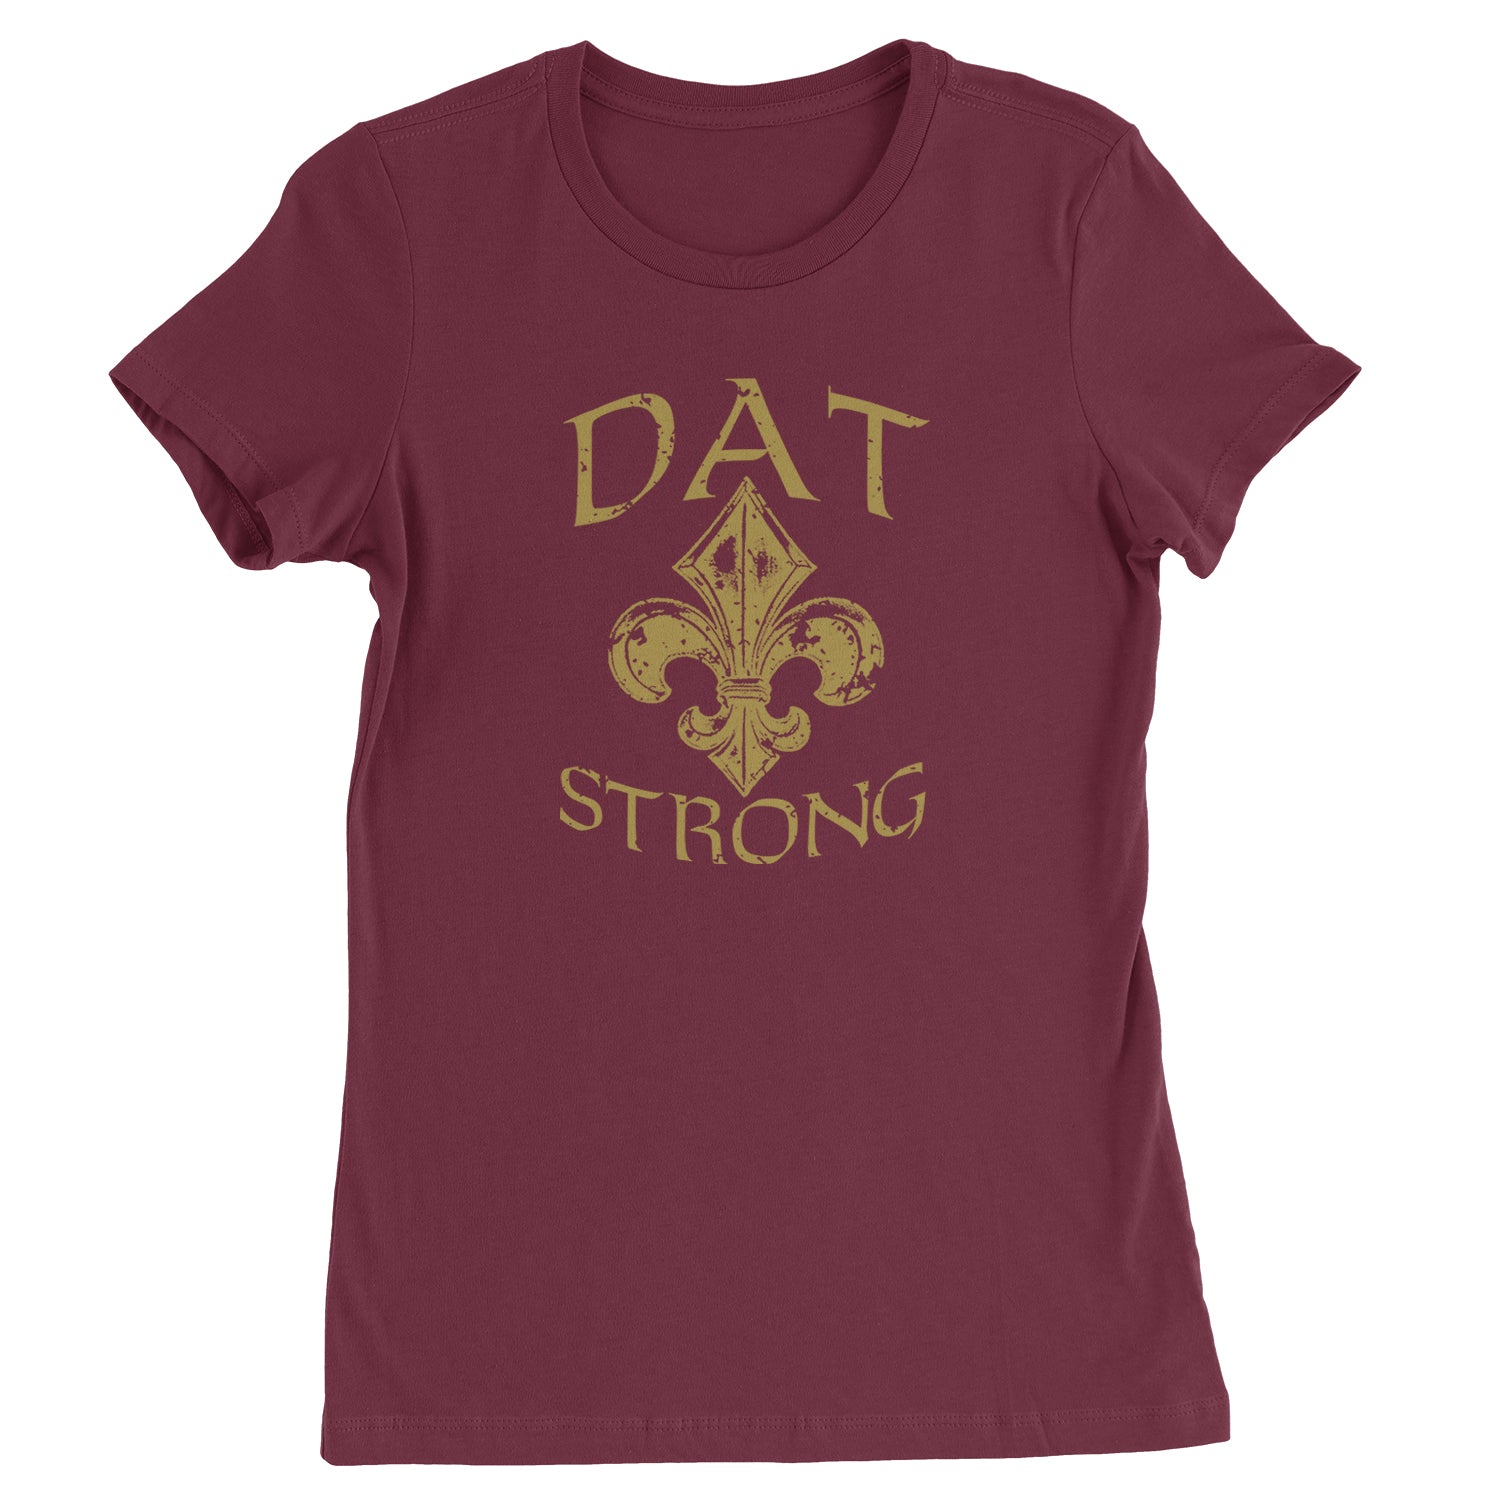 Dat Strong New Orleans Womens T-shirt dat, de, fan, fleur, jersey, lis, new, orleans, sports, strong, who by Expression Tees